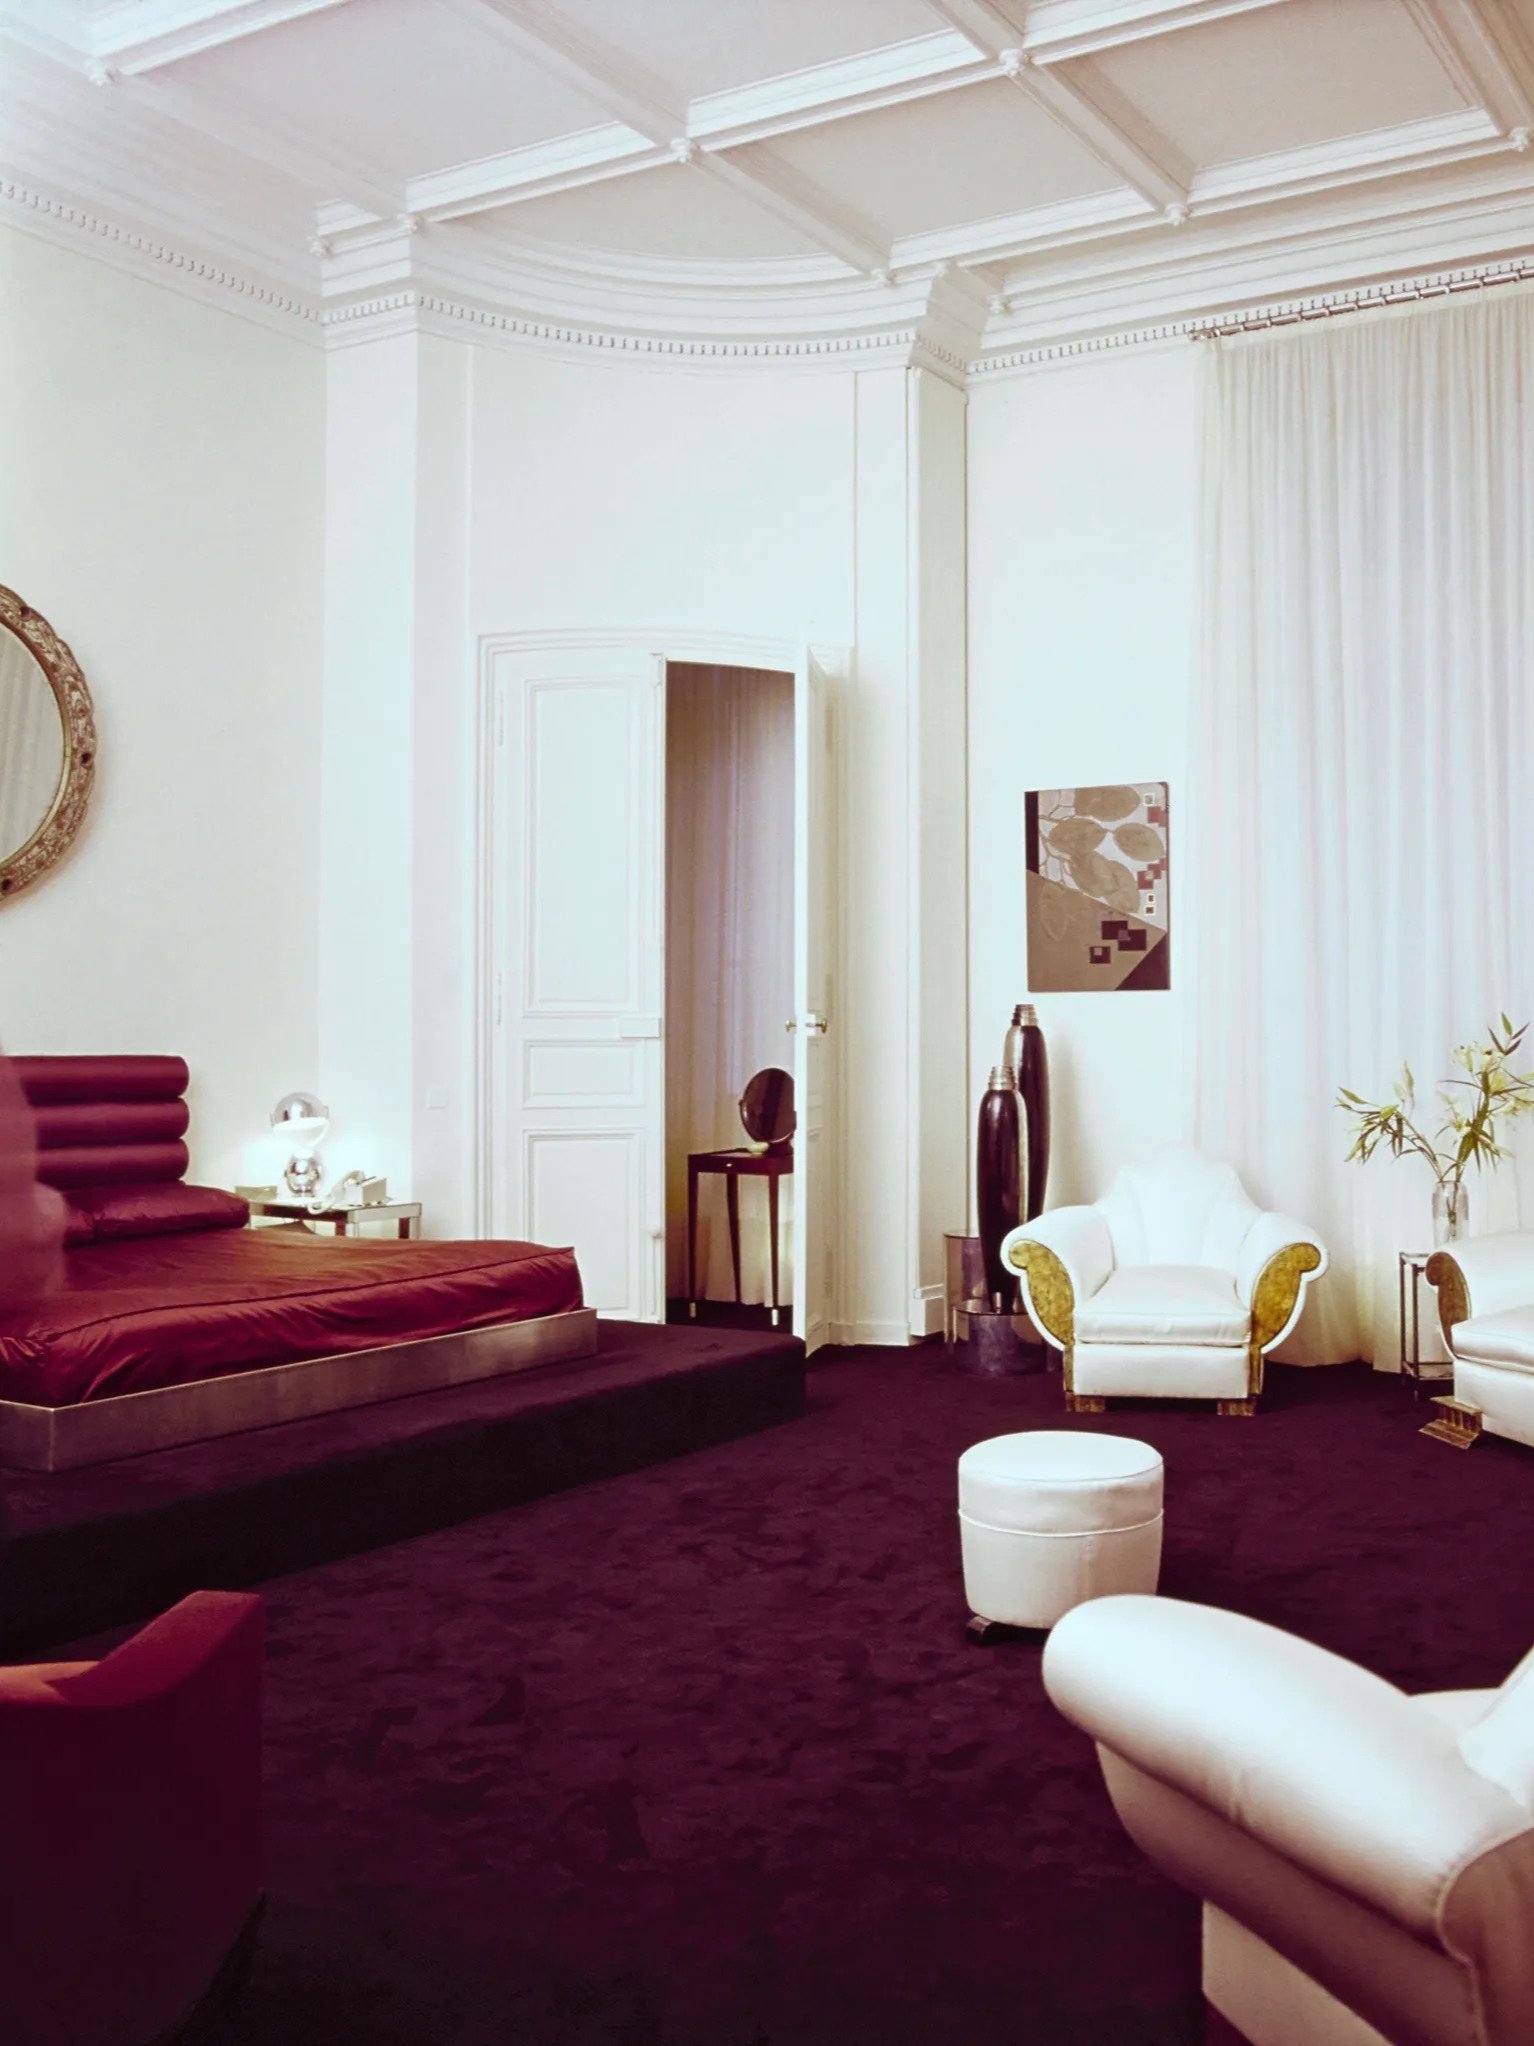 coco chanel's house